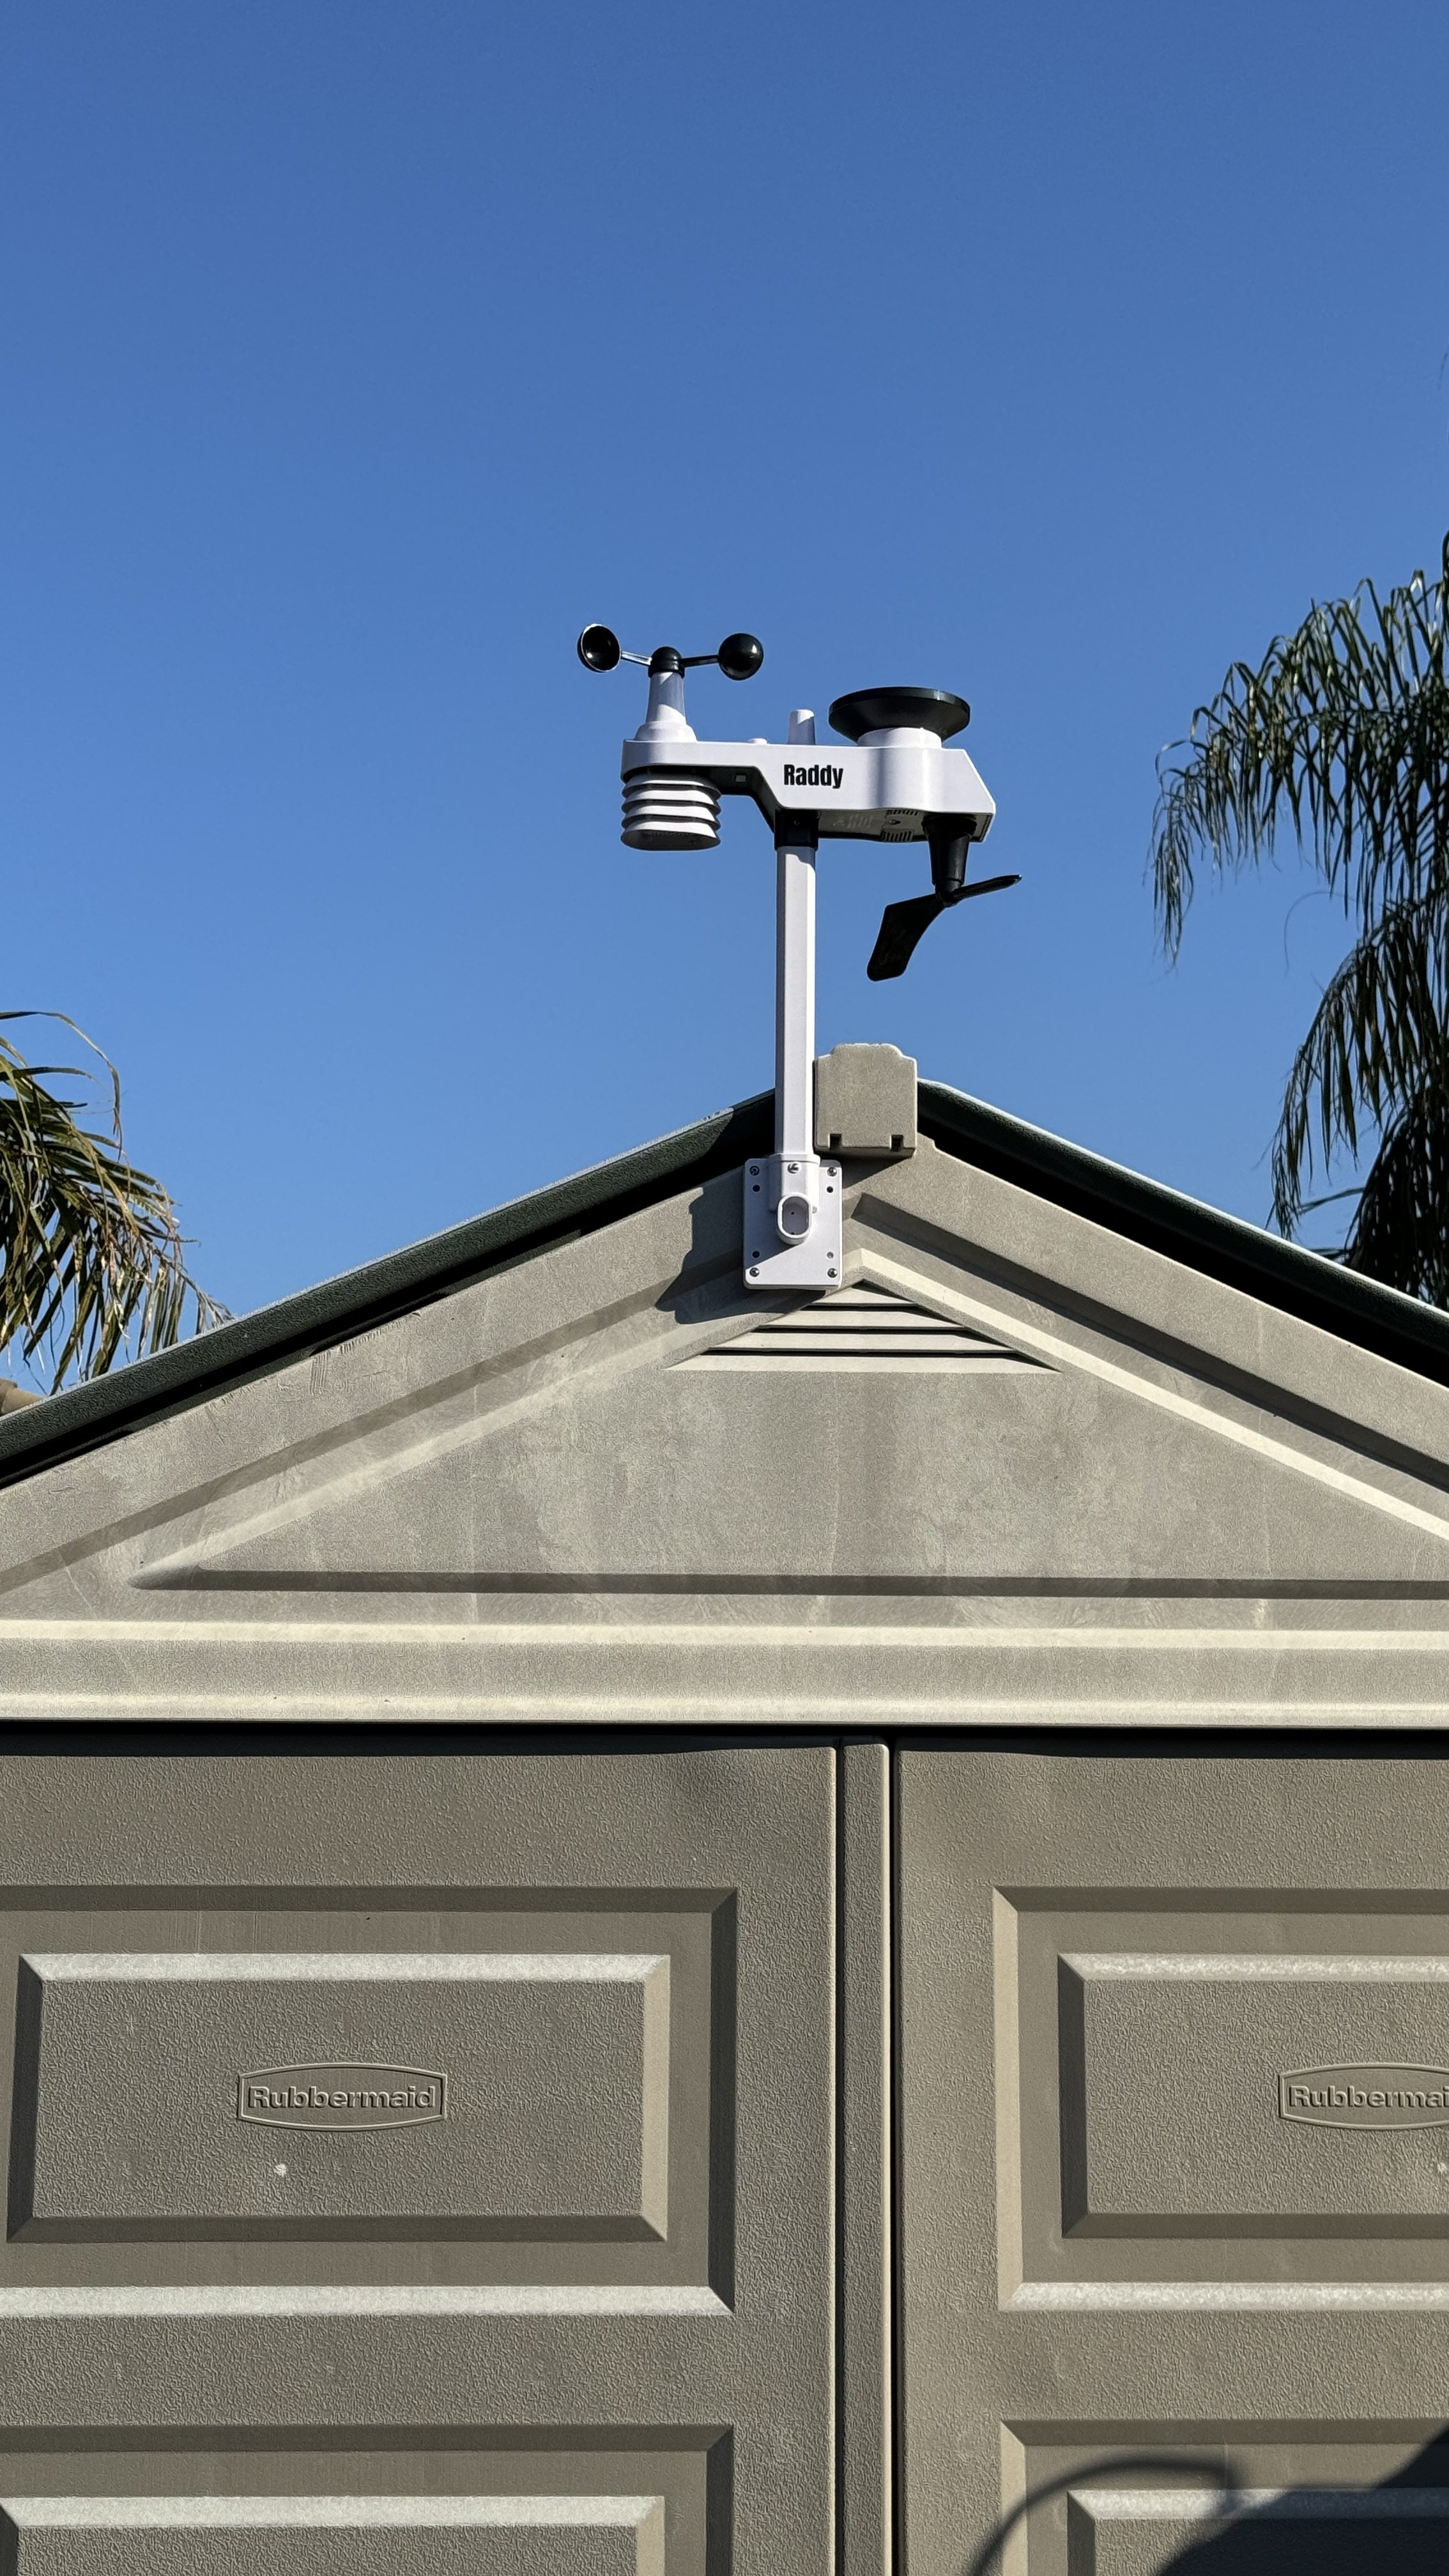 Raddy sensor array weather vane atop the backyard shed roof